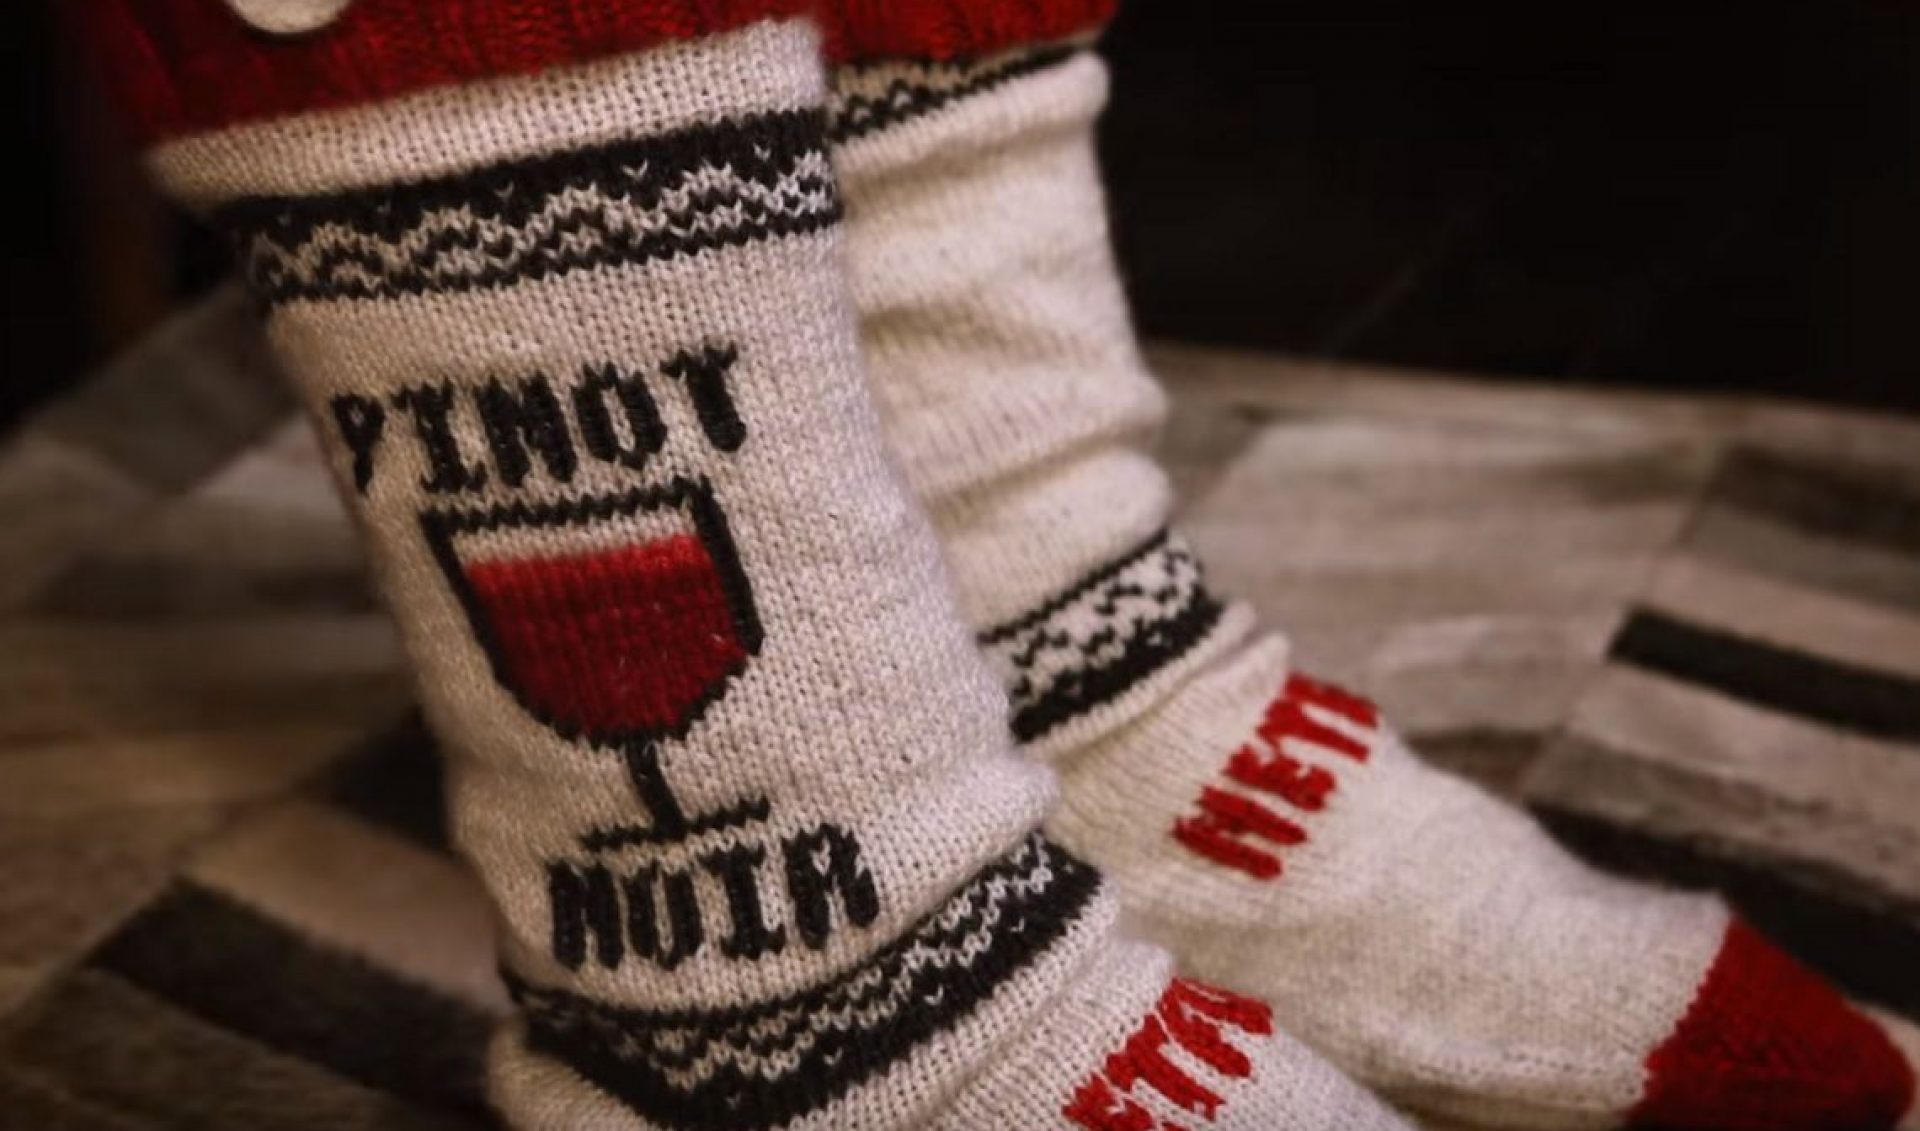 Netflix’s New DIY Socks Will Pause Your Show When You Fall Asleep (Yes, This Is For Real)